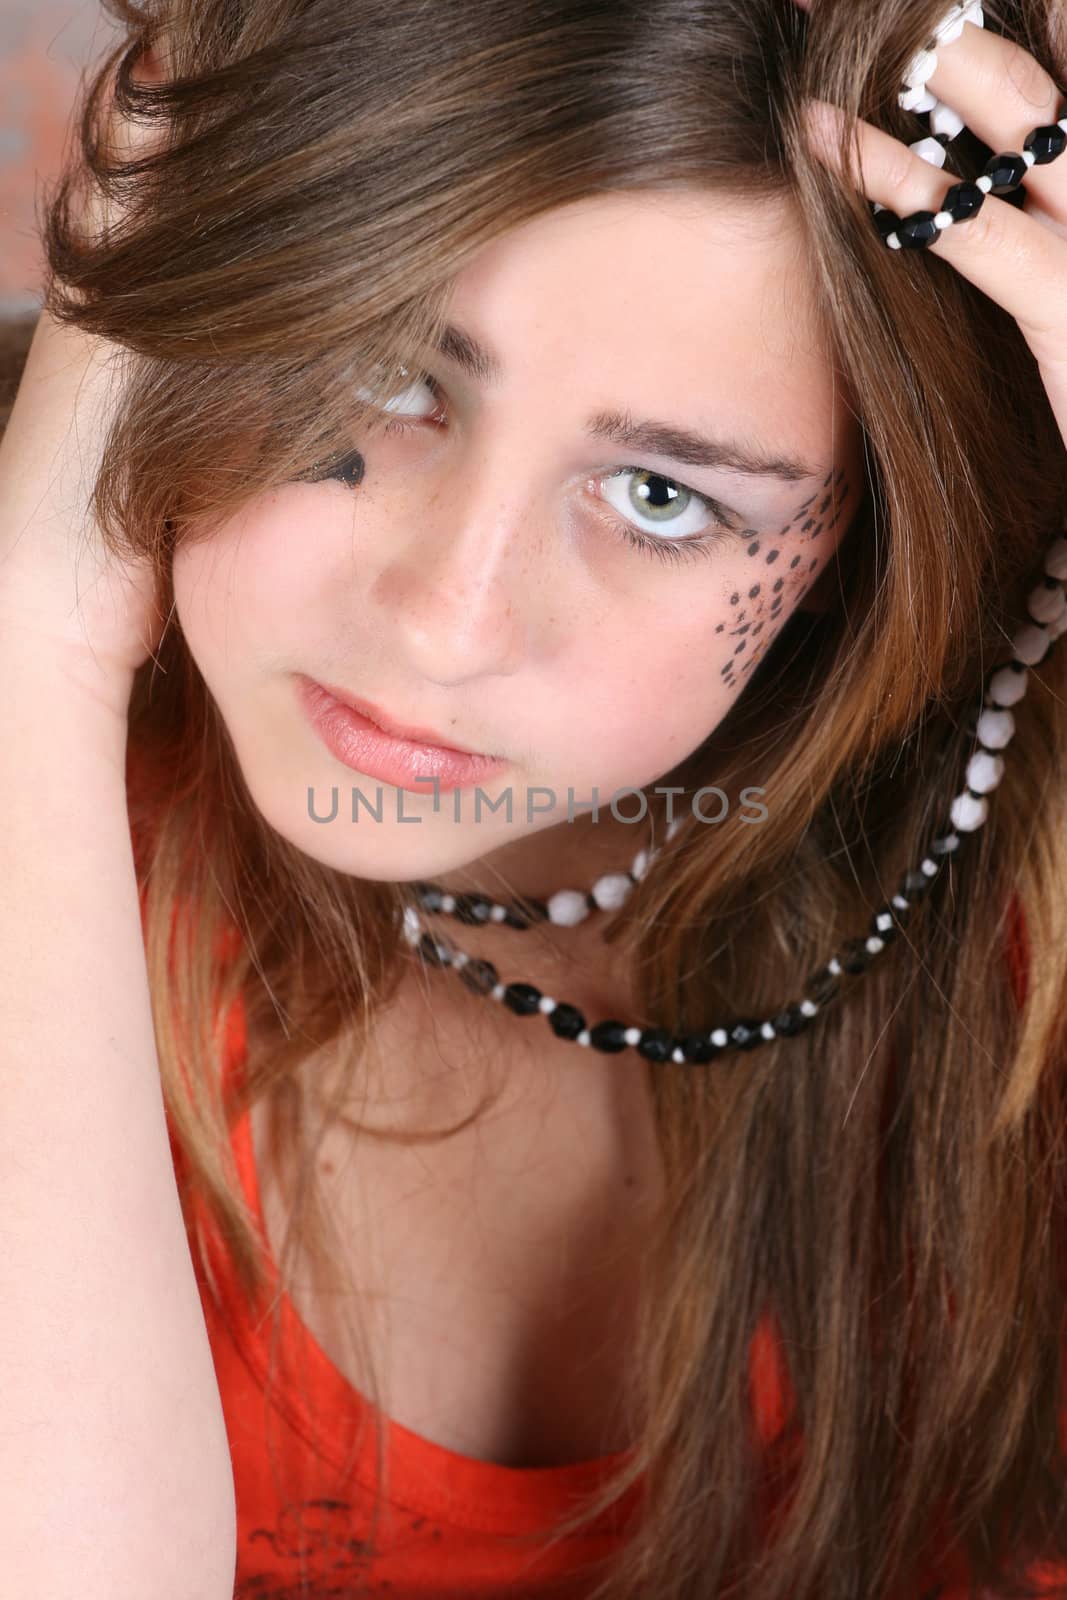 Teenage girl with face paint and fashionable jewellery
Beautiful teenage female with an angelic face